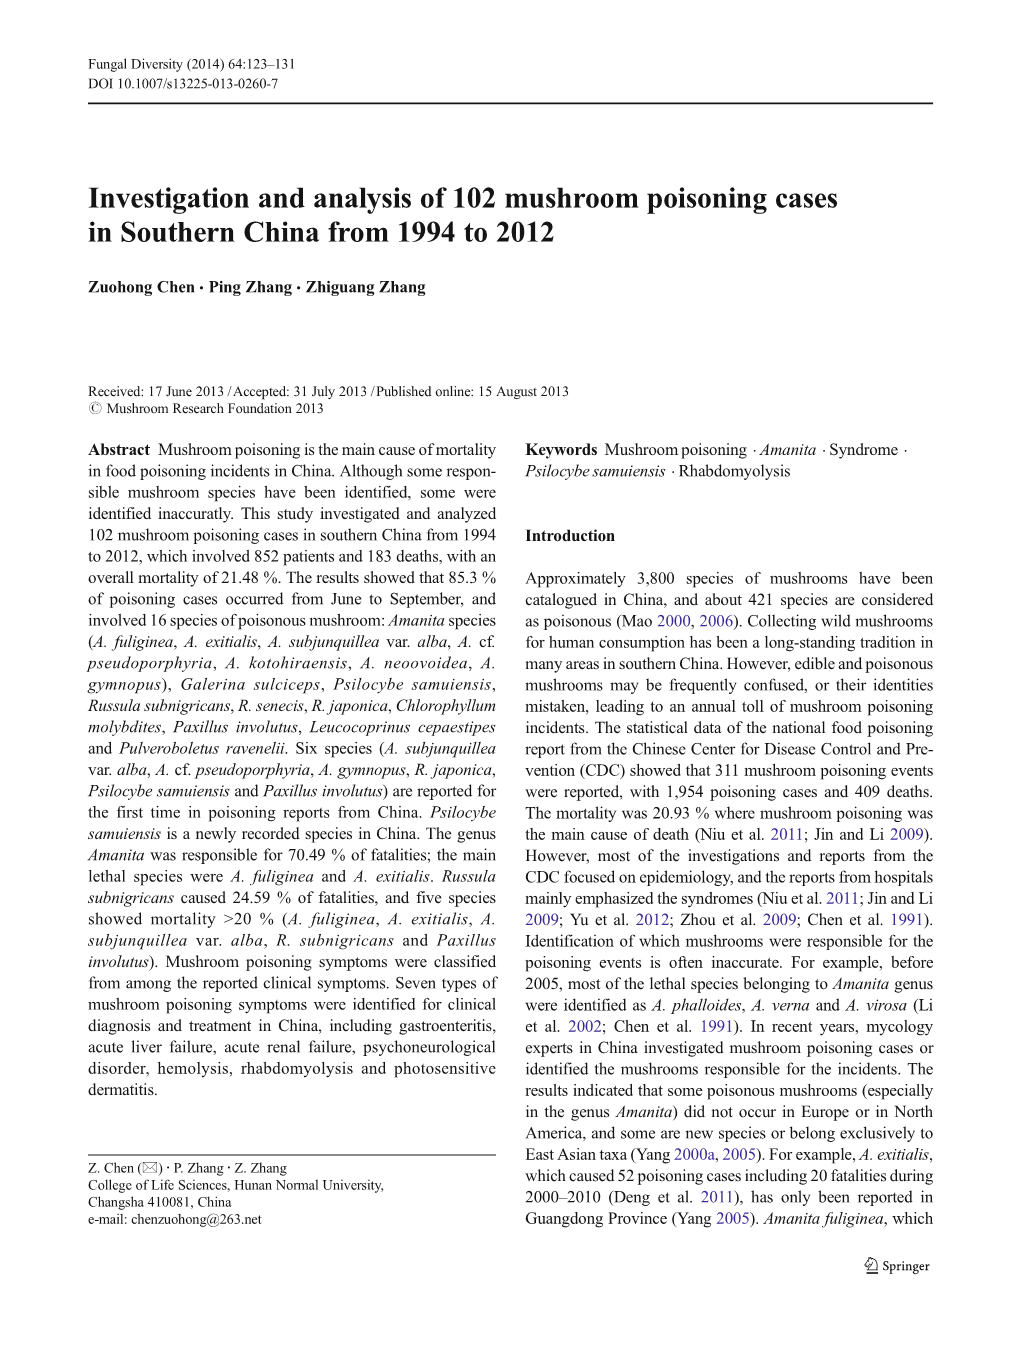 Investigation and Analysis of 102 Mushroom Poisoning Cases in Southern China from 1994 to 2012